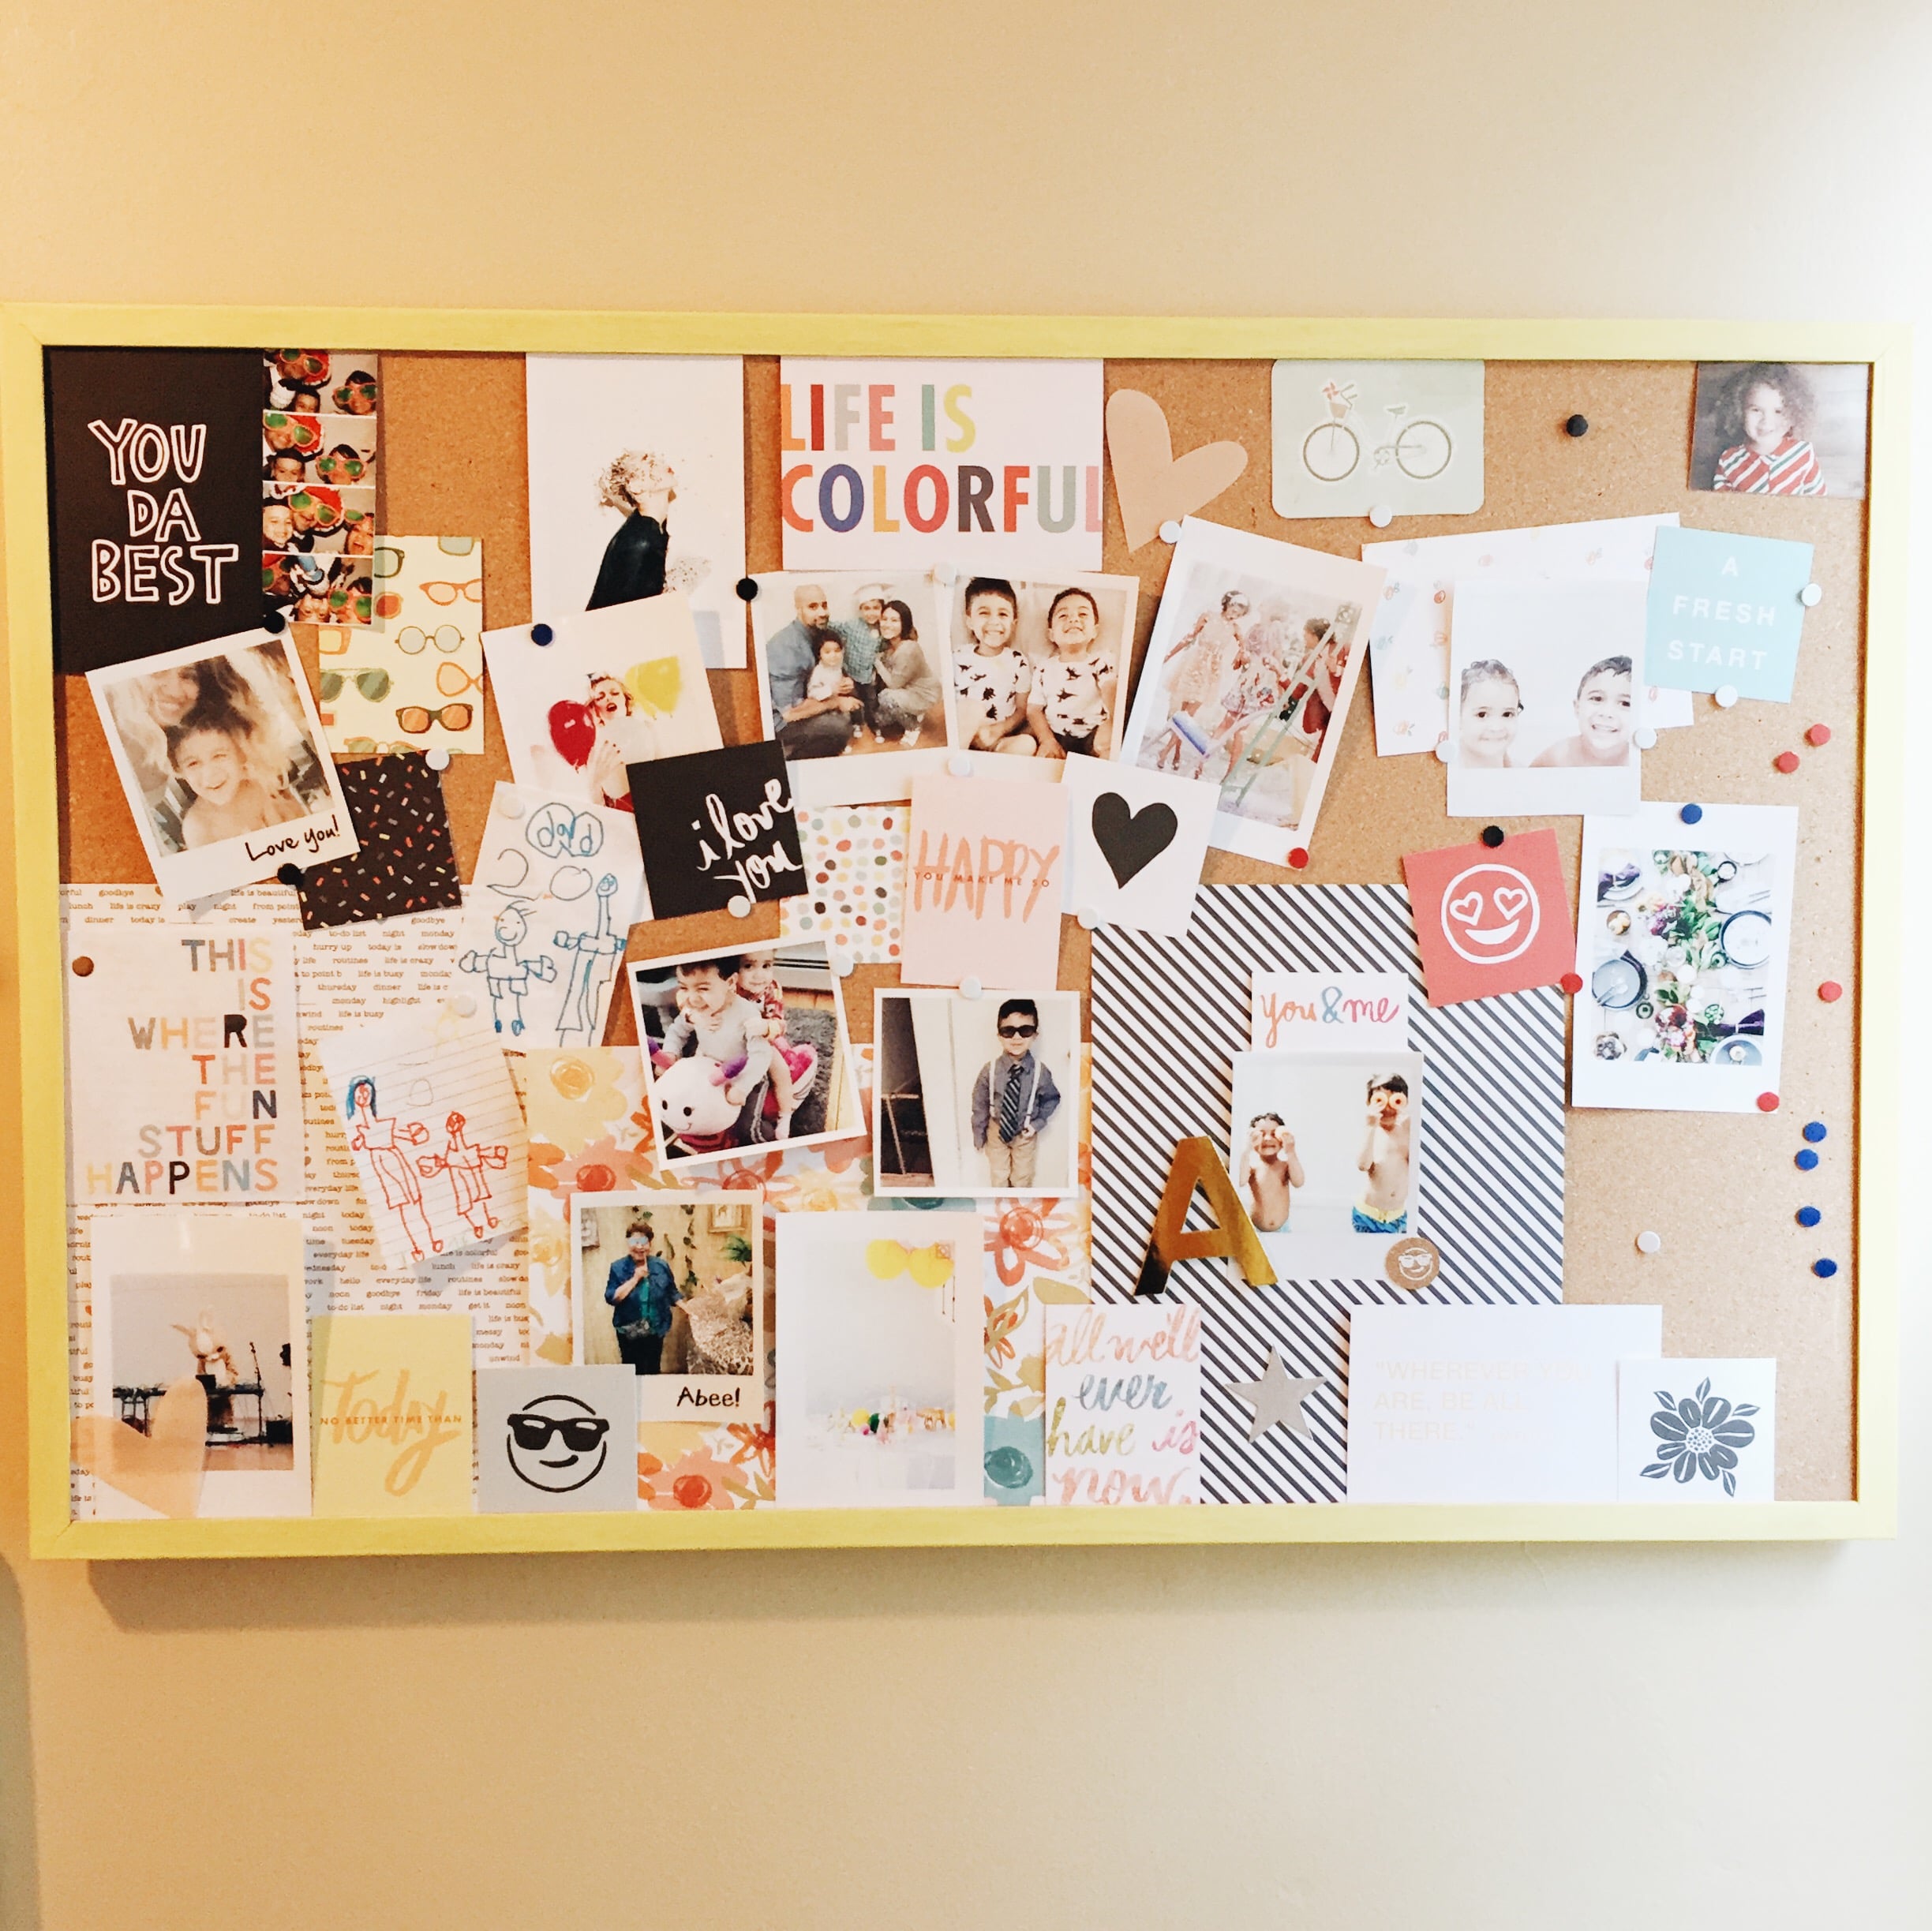 DIY Vision Board Ideas For Students